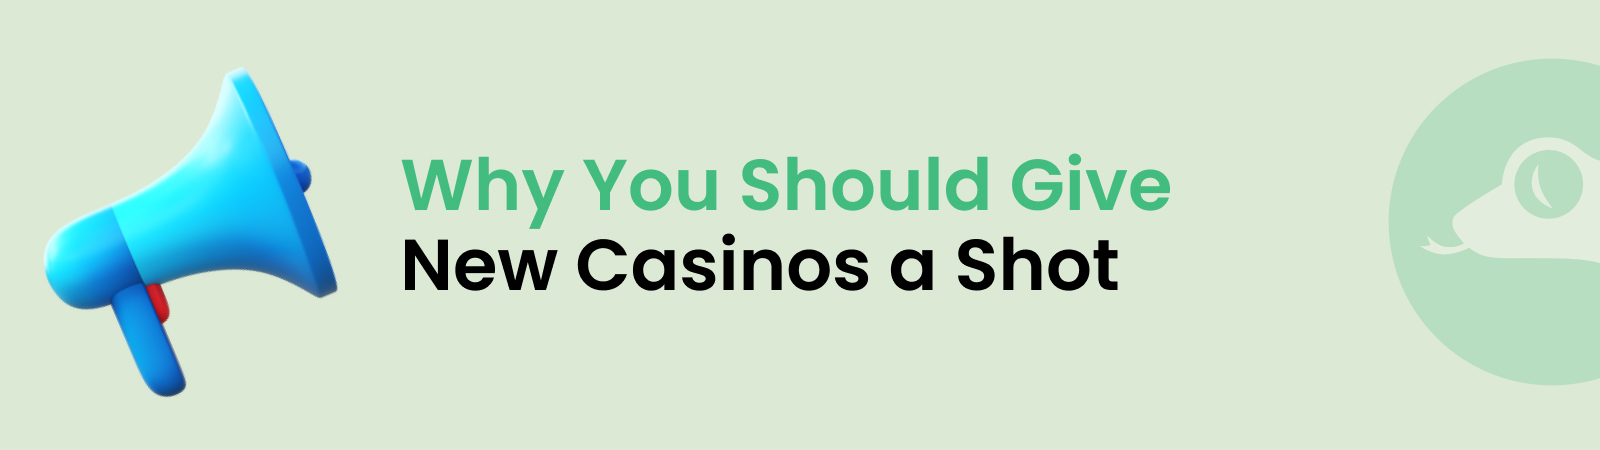 should give new casinos a shot